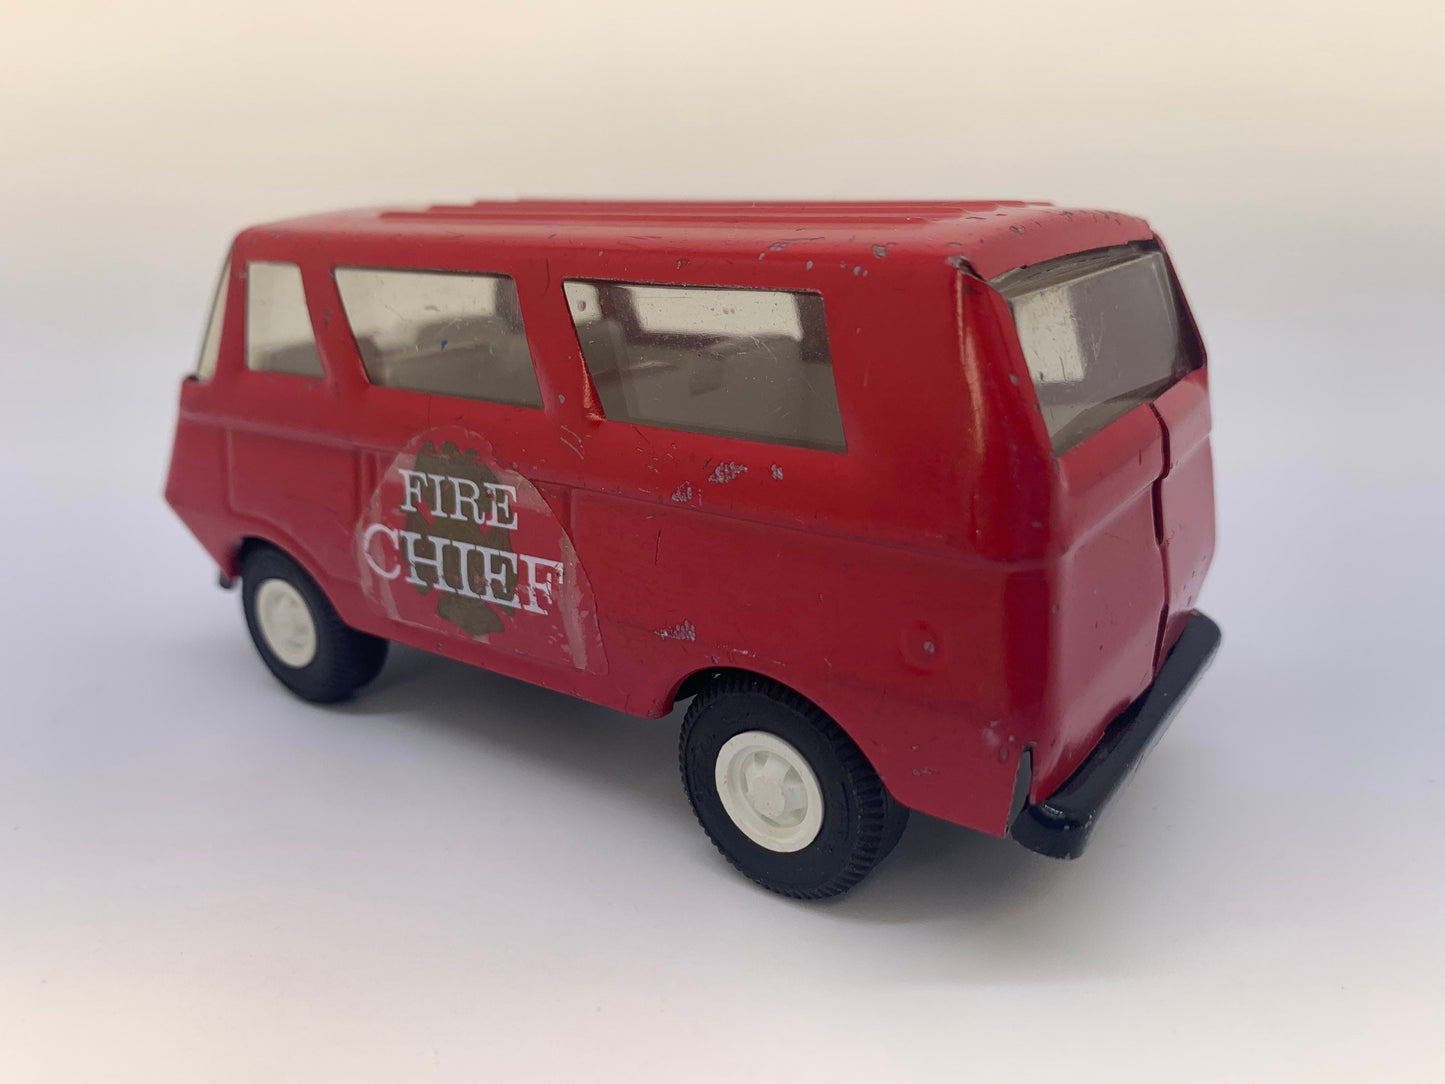 Tonka Fire Chief Van Red Collectable Miniature Scale Model Toy Car Perfect Birthday Gift